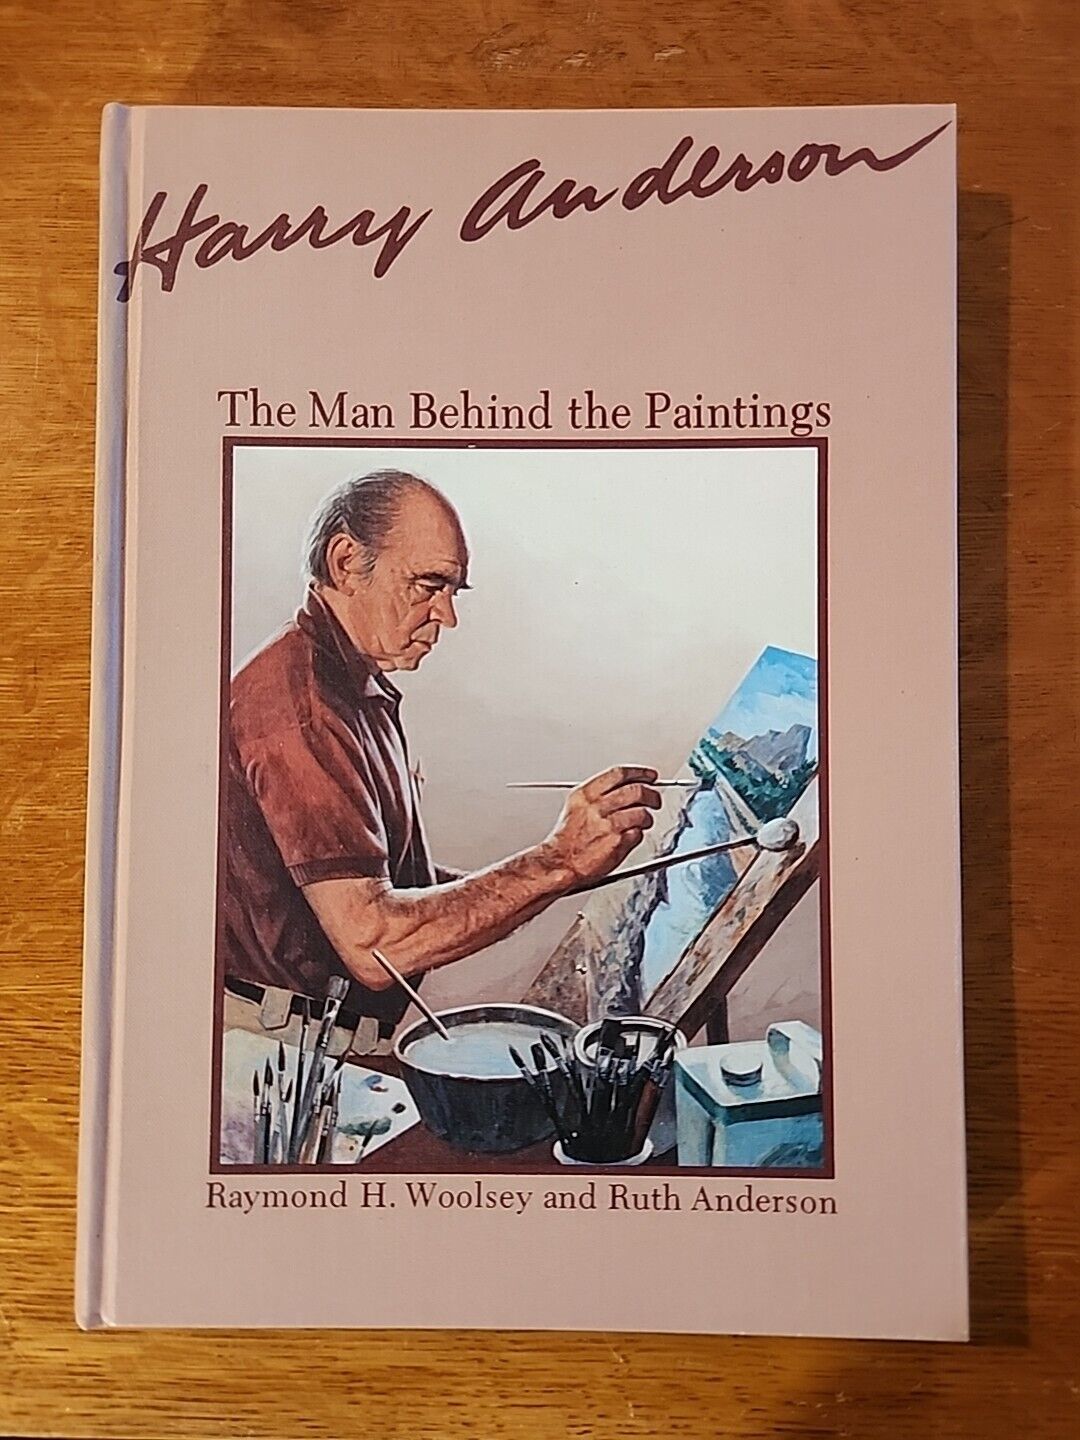 Harry Anderson- The Man Behind the Paintings, Raymond Woolsey and Ruth Anderson